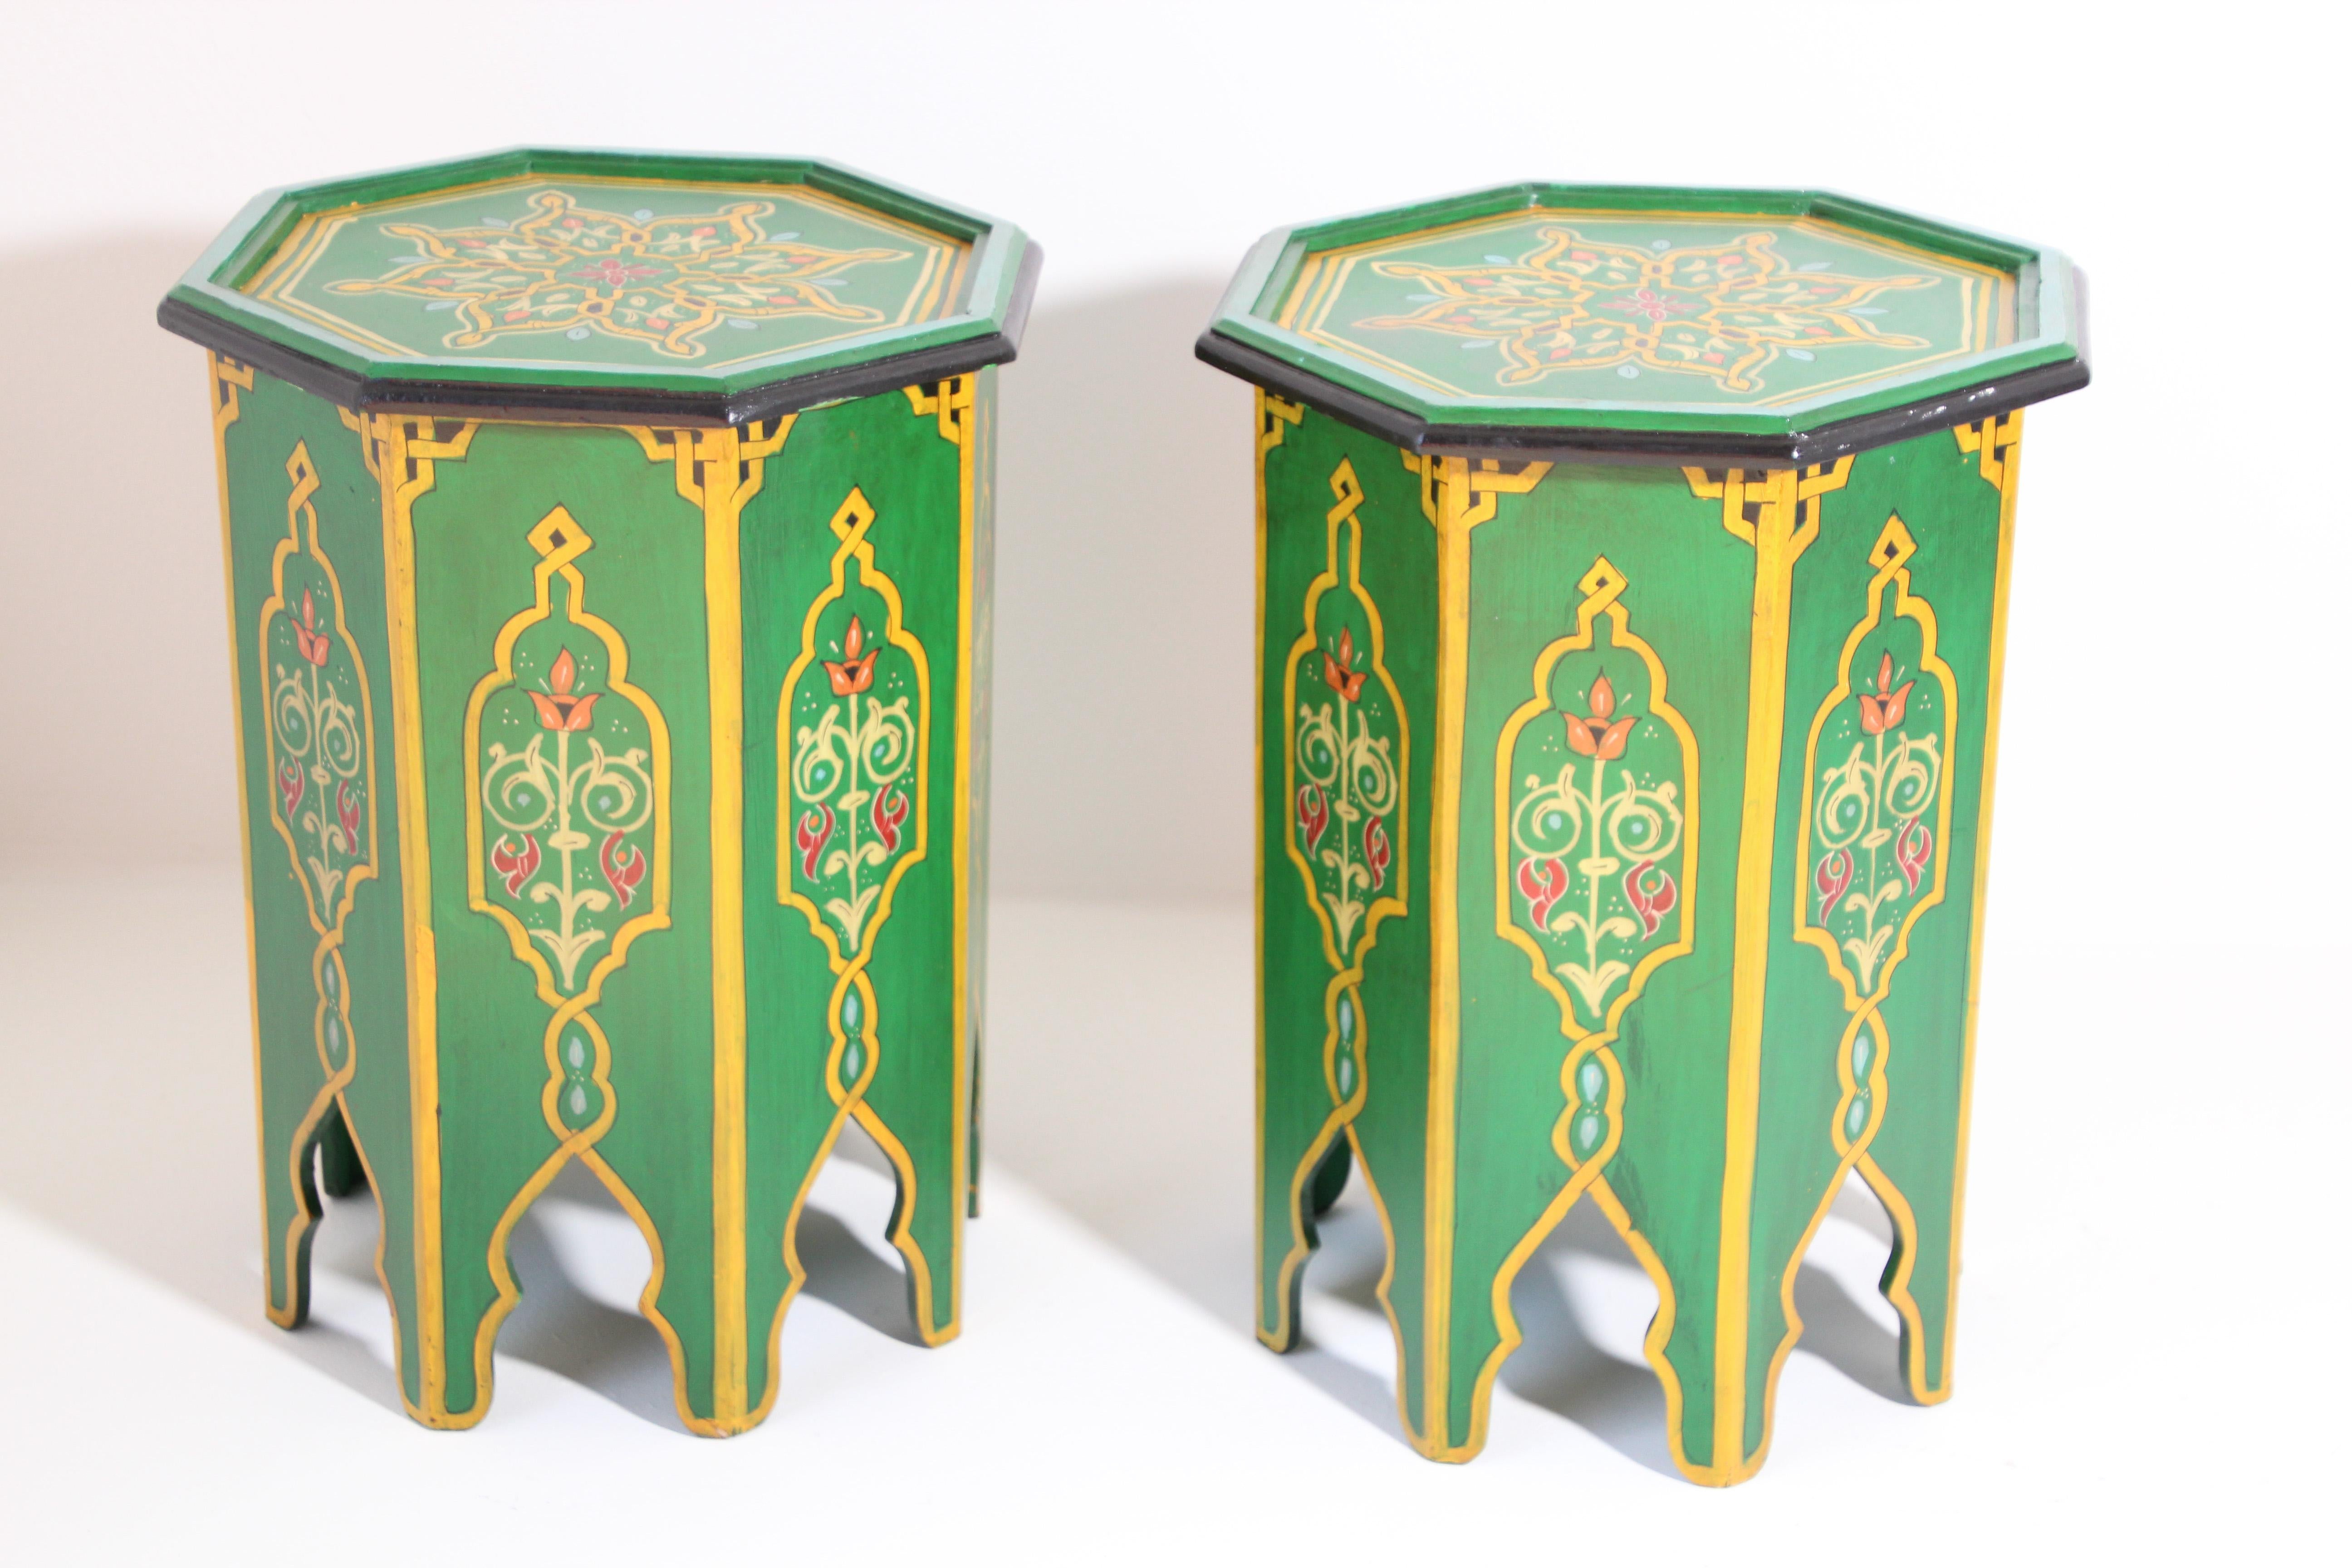 Pair of Moroccan handcrafted green hand painted tabourets or side tables.
Octagonal shape pedestal tables with Moorish arches.
Very decorative fine artwork in octagonal shape base.
You can use them as nightstand, stools, or side pedestal table.
This